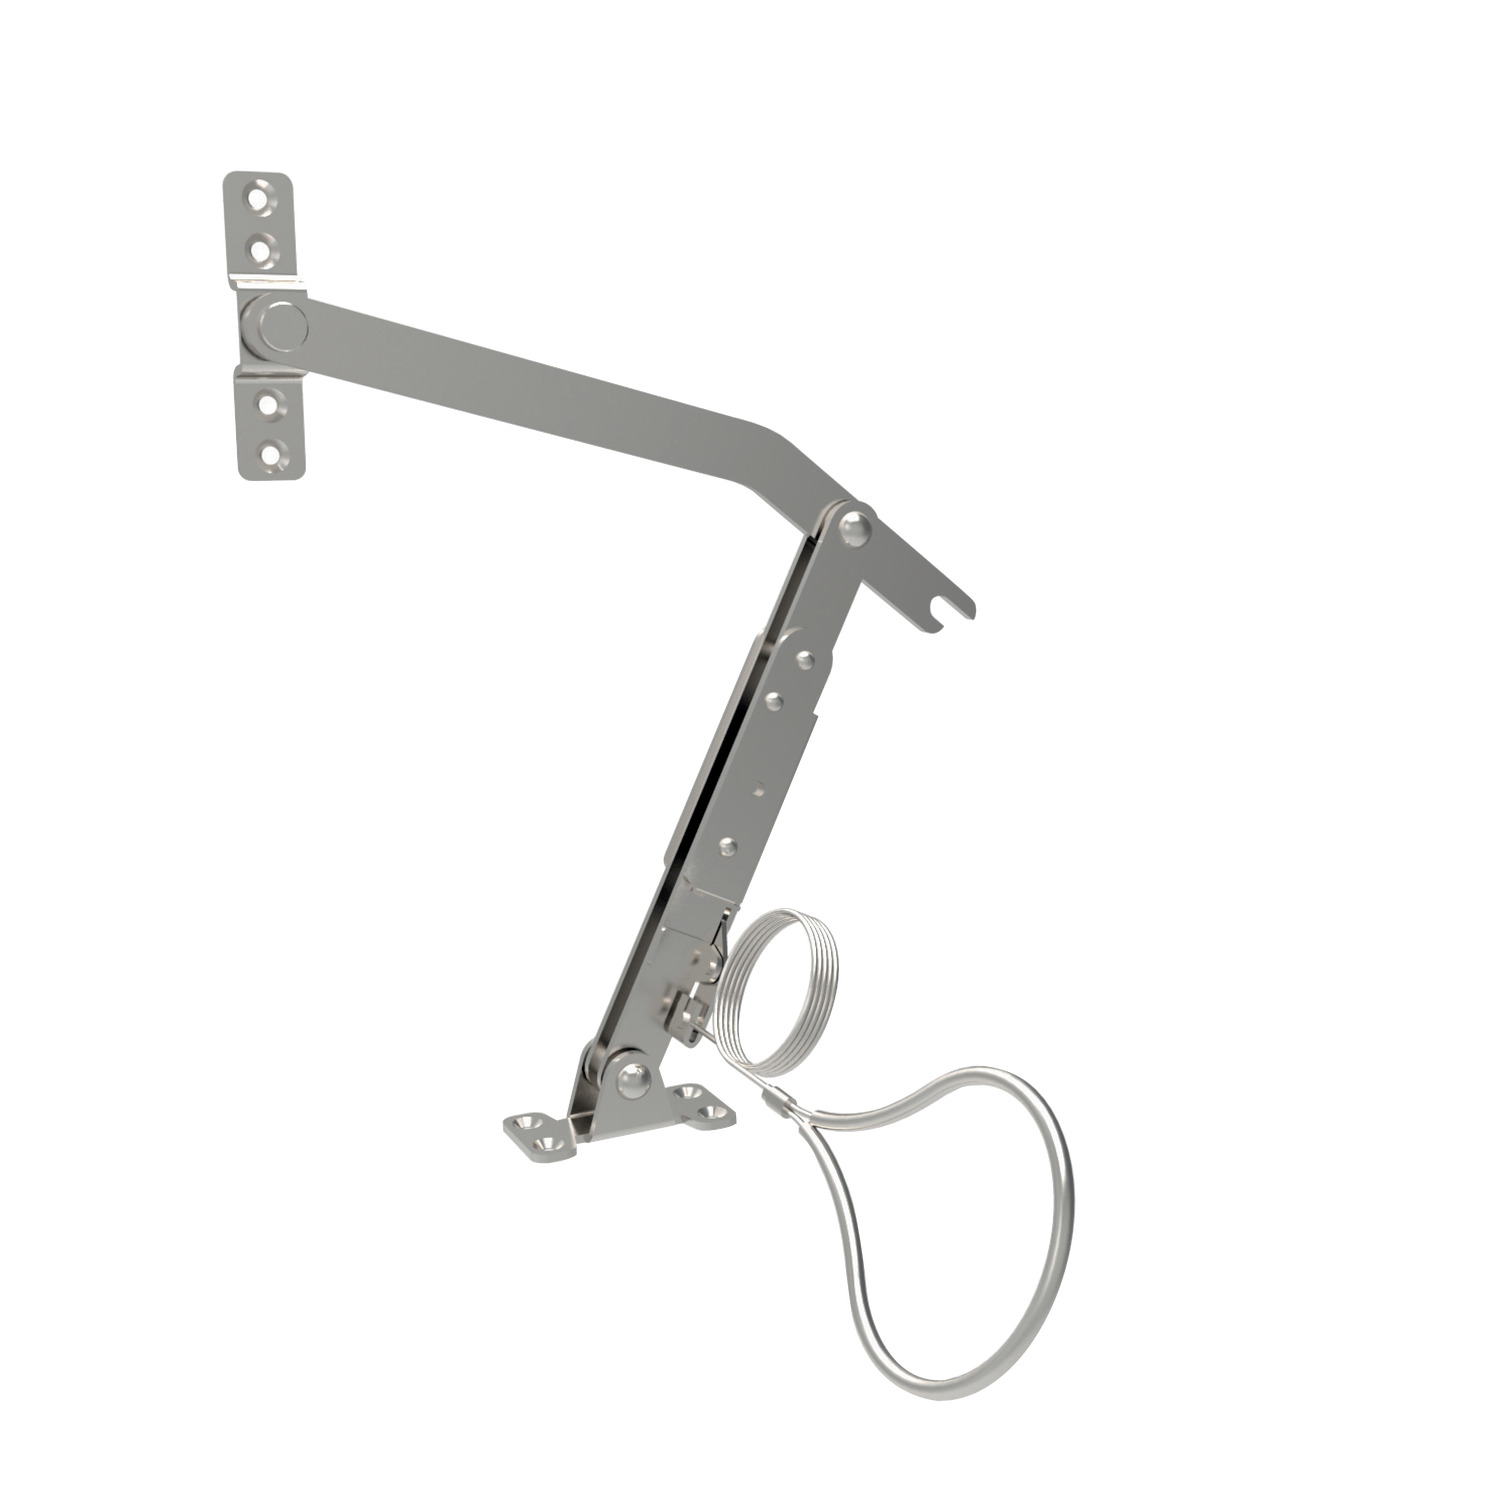 Door Stays - Heavy Duty This is made for heavy duty horizontal door applications. Made from Stainless Steel. Right and Left versions are available, with or without lock release wire.